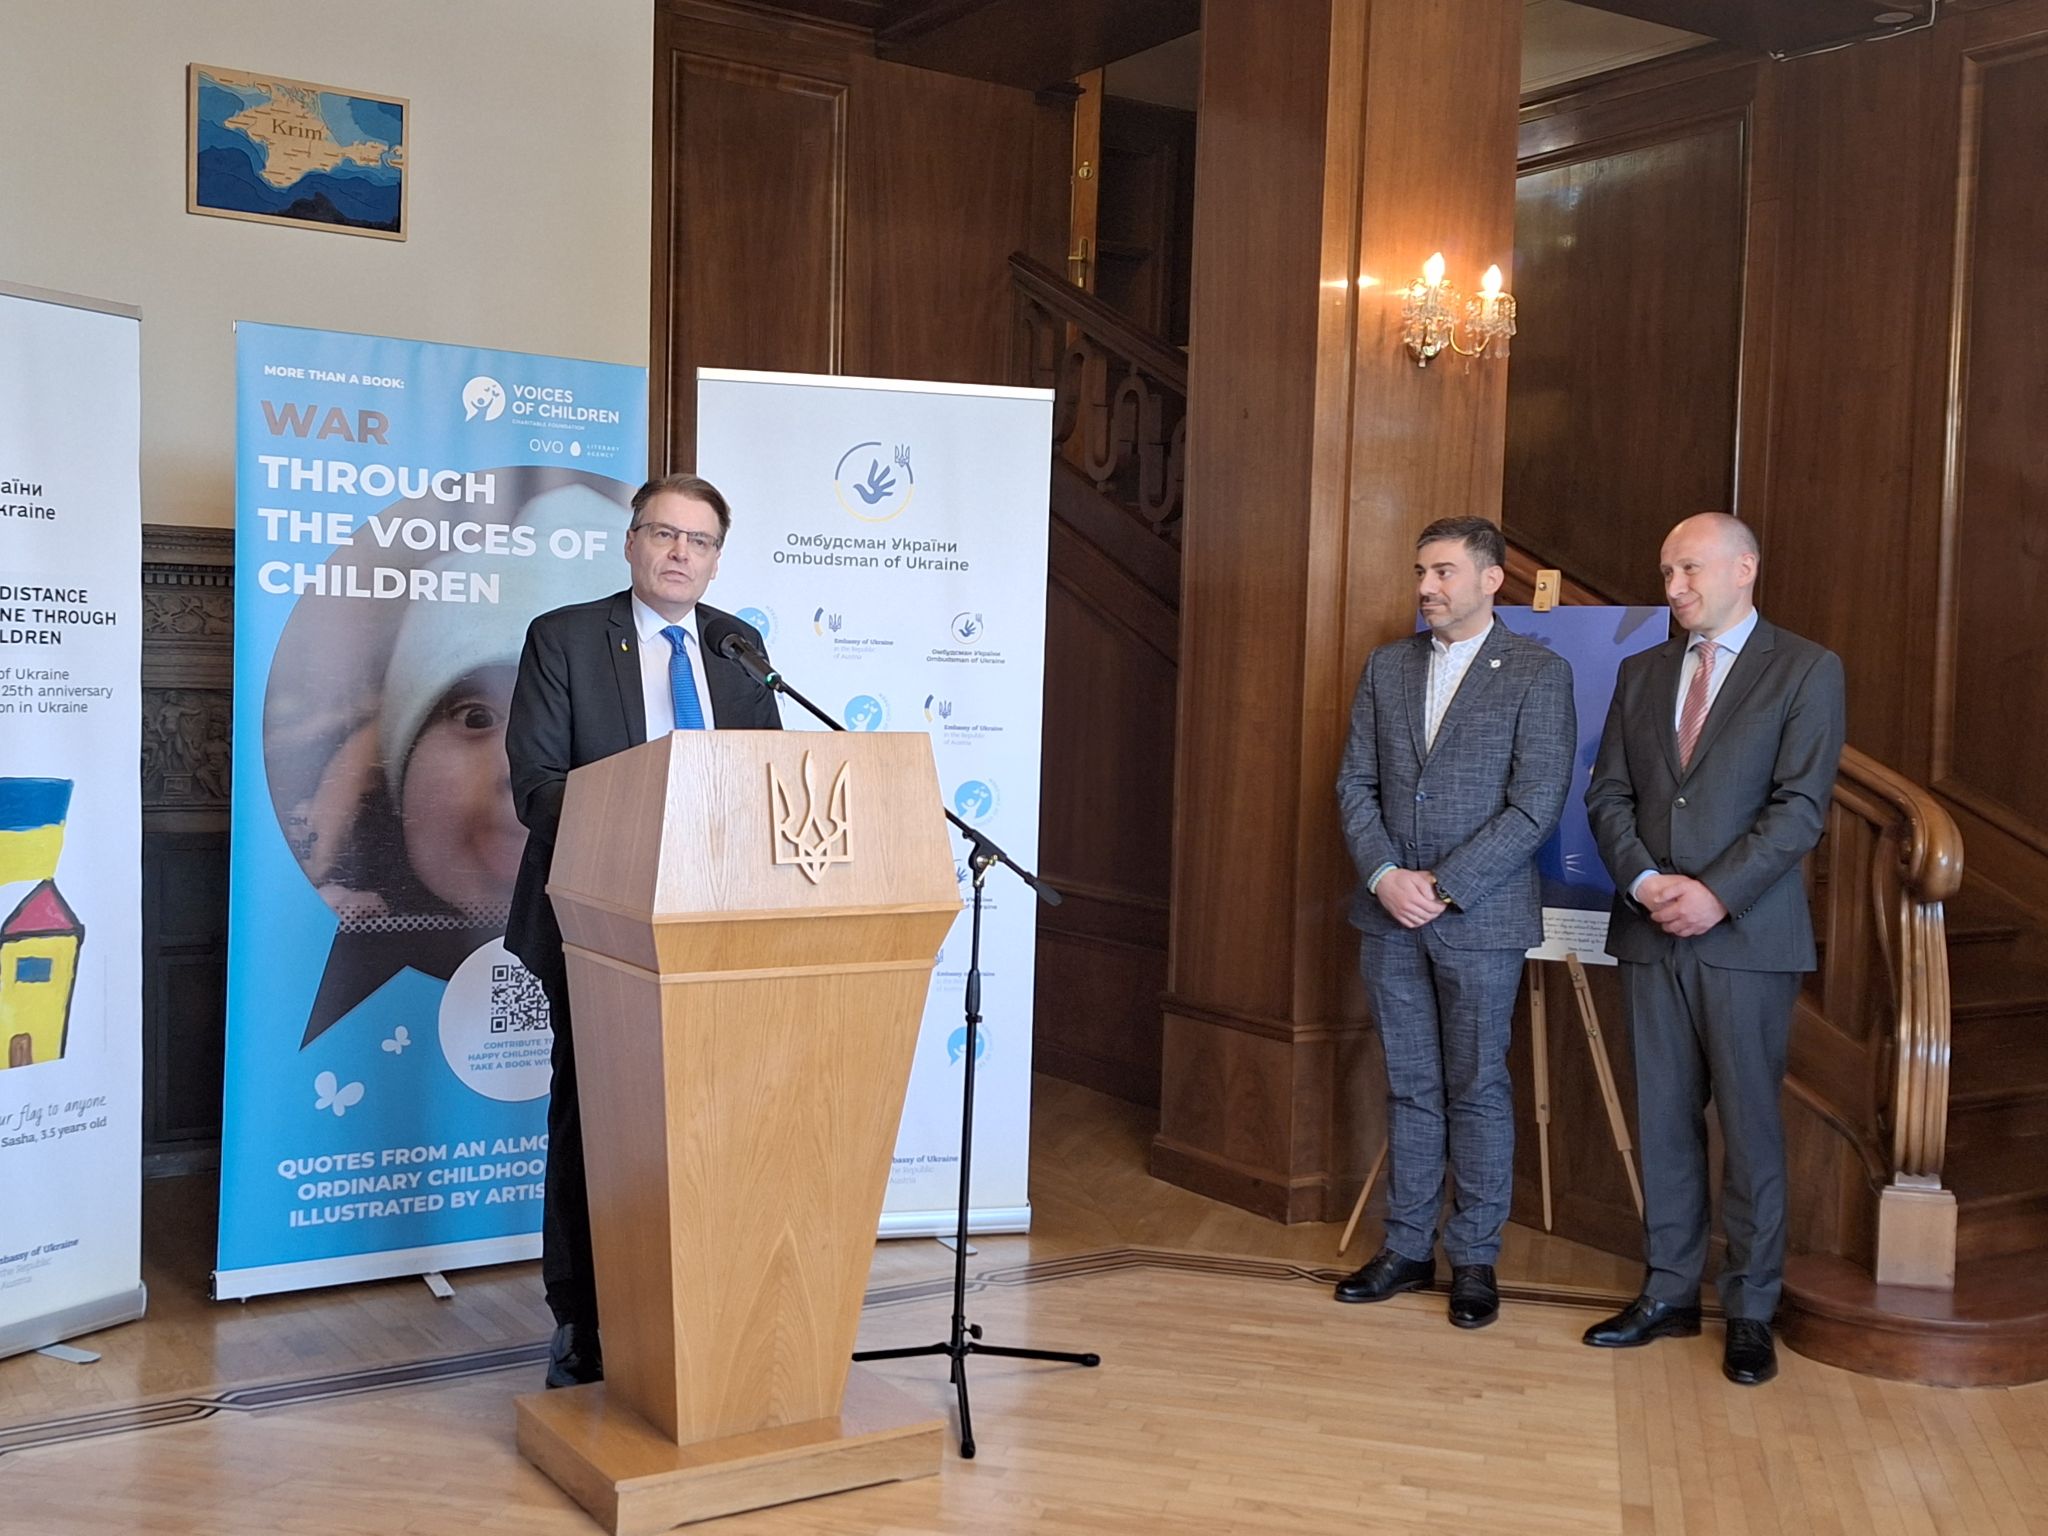 L to R: IOI President, Chris Field PSM, providing a Welcome Address, alongside fellow distinguished speakers Ukrainian Parliament Commissioner for Human Rights, Dmytro Lubinets, and Ukrainian Ambassador to Austria, Dr Vasyl Khymynets 